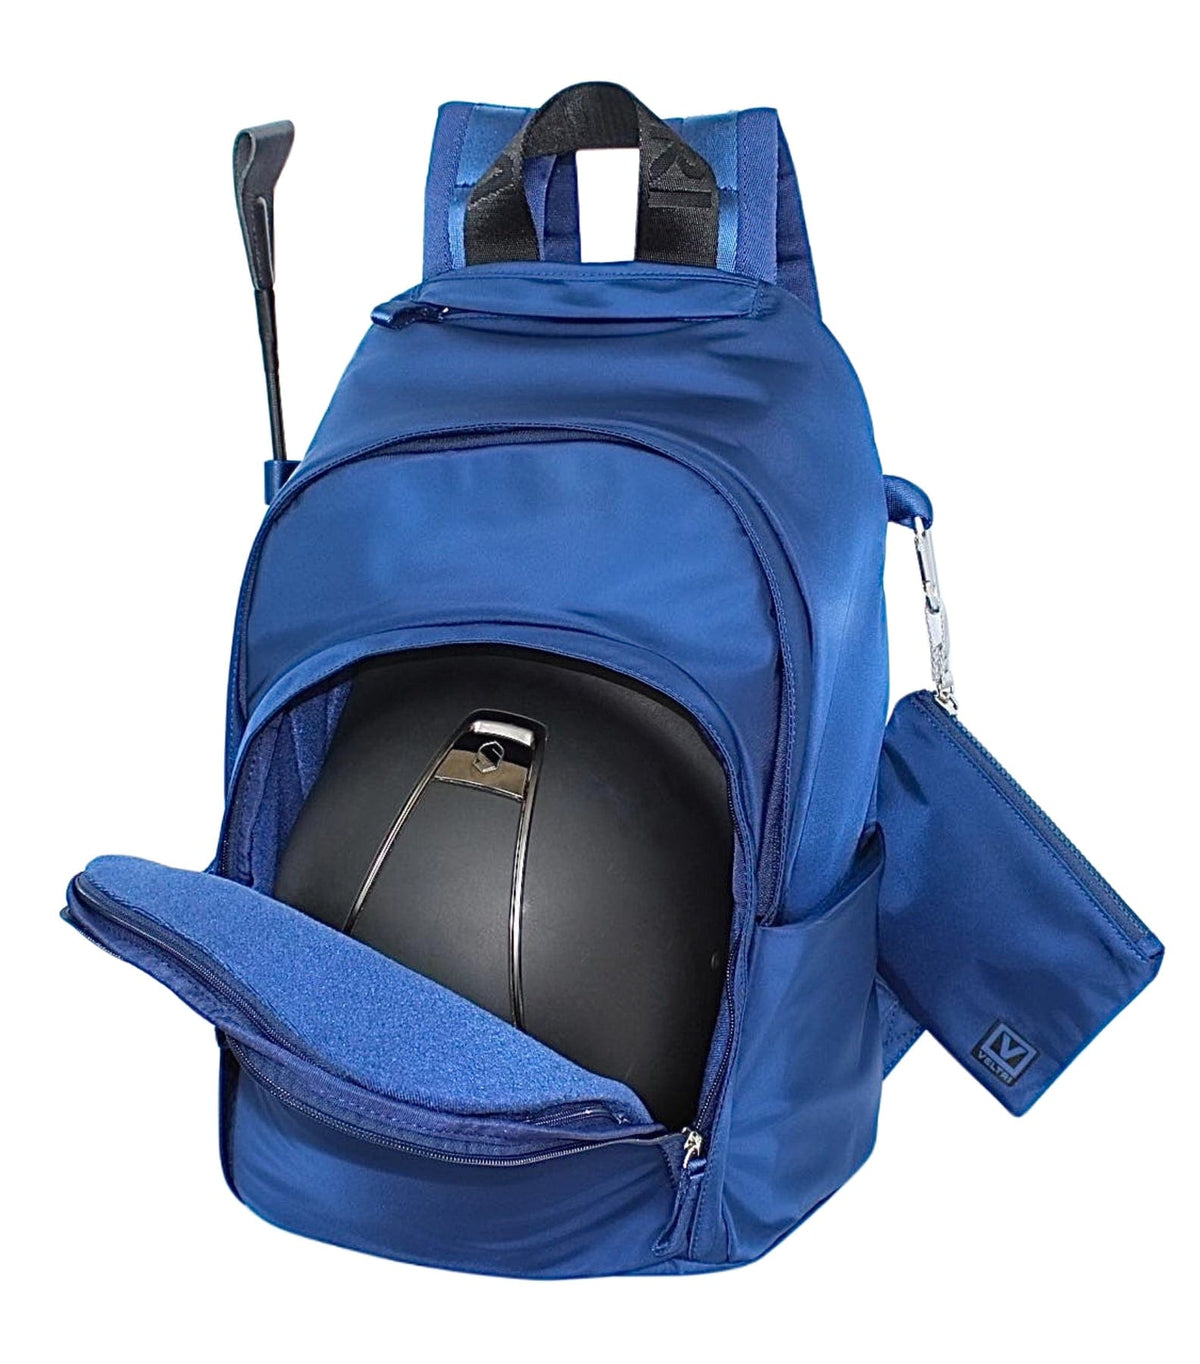 Veltri Backpacks Veltri- Helmet Backpack (Bright Navy/Silver Smiley Face) equestrian team apparel online tack store mobile tack store custom farm apparel custom show stable clothing equestrian lifestyle horse show clothing riding clothes horses equestrian tack store